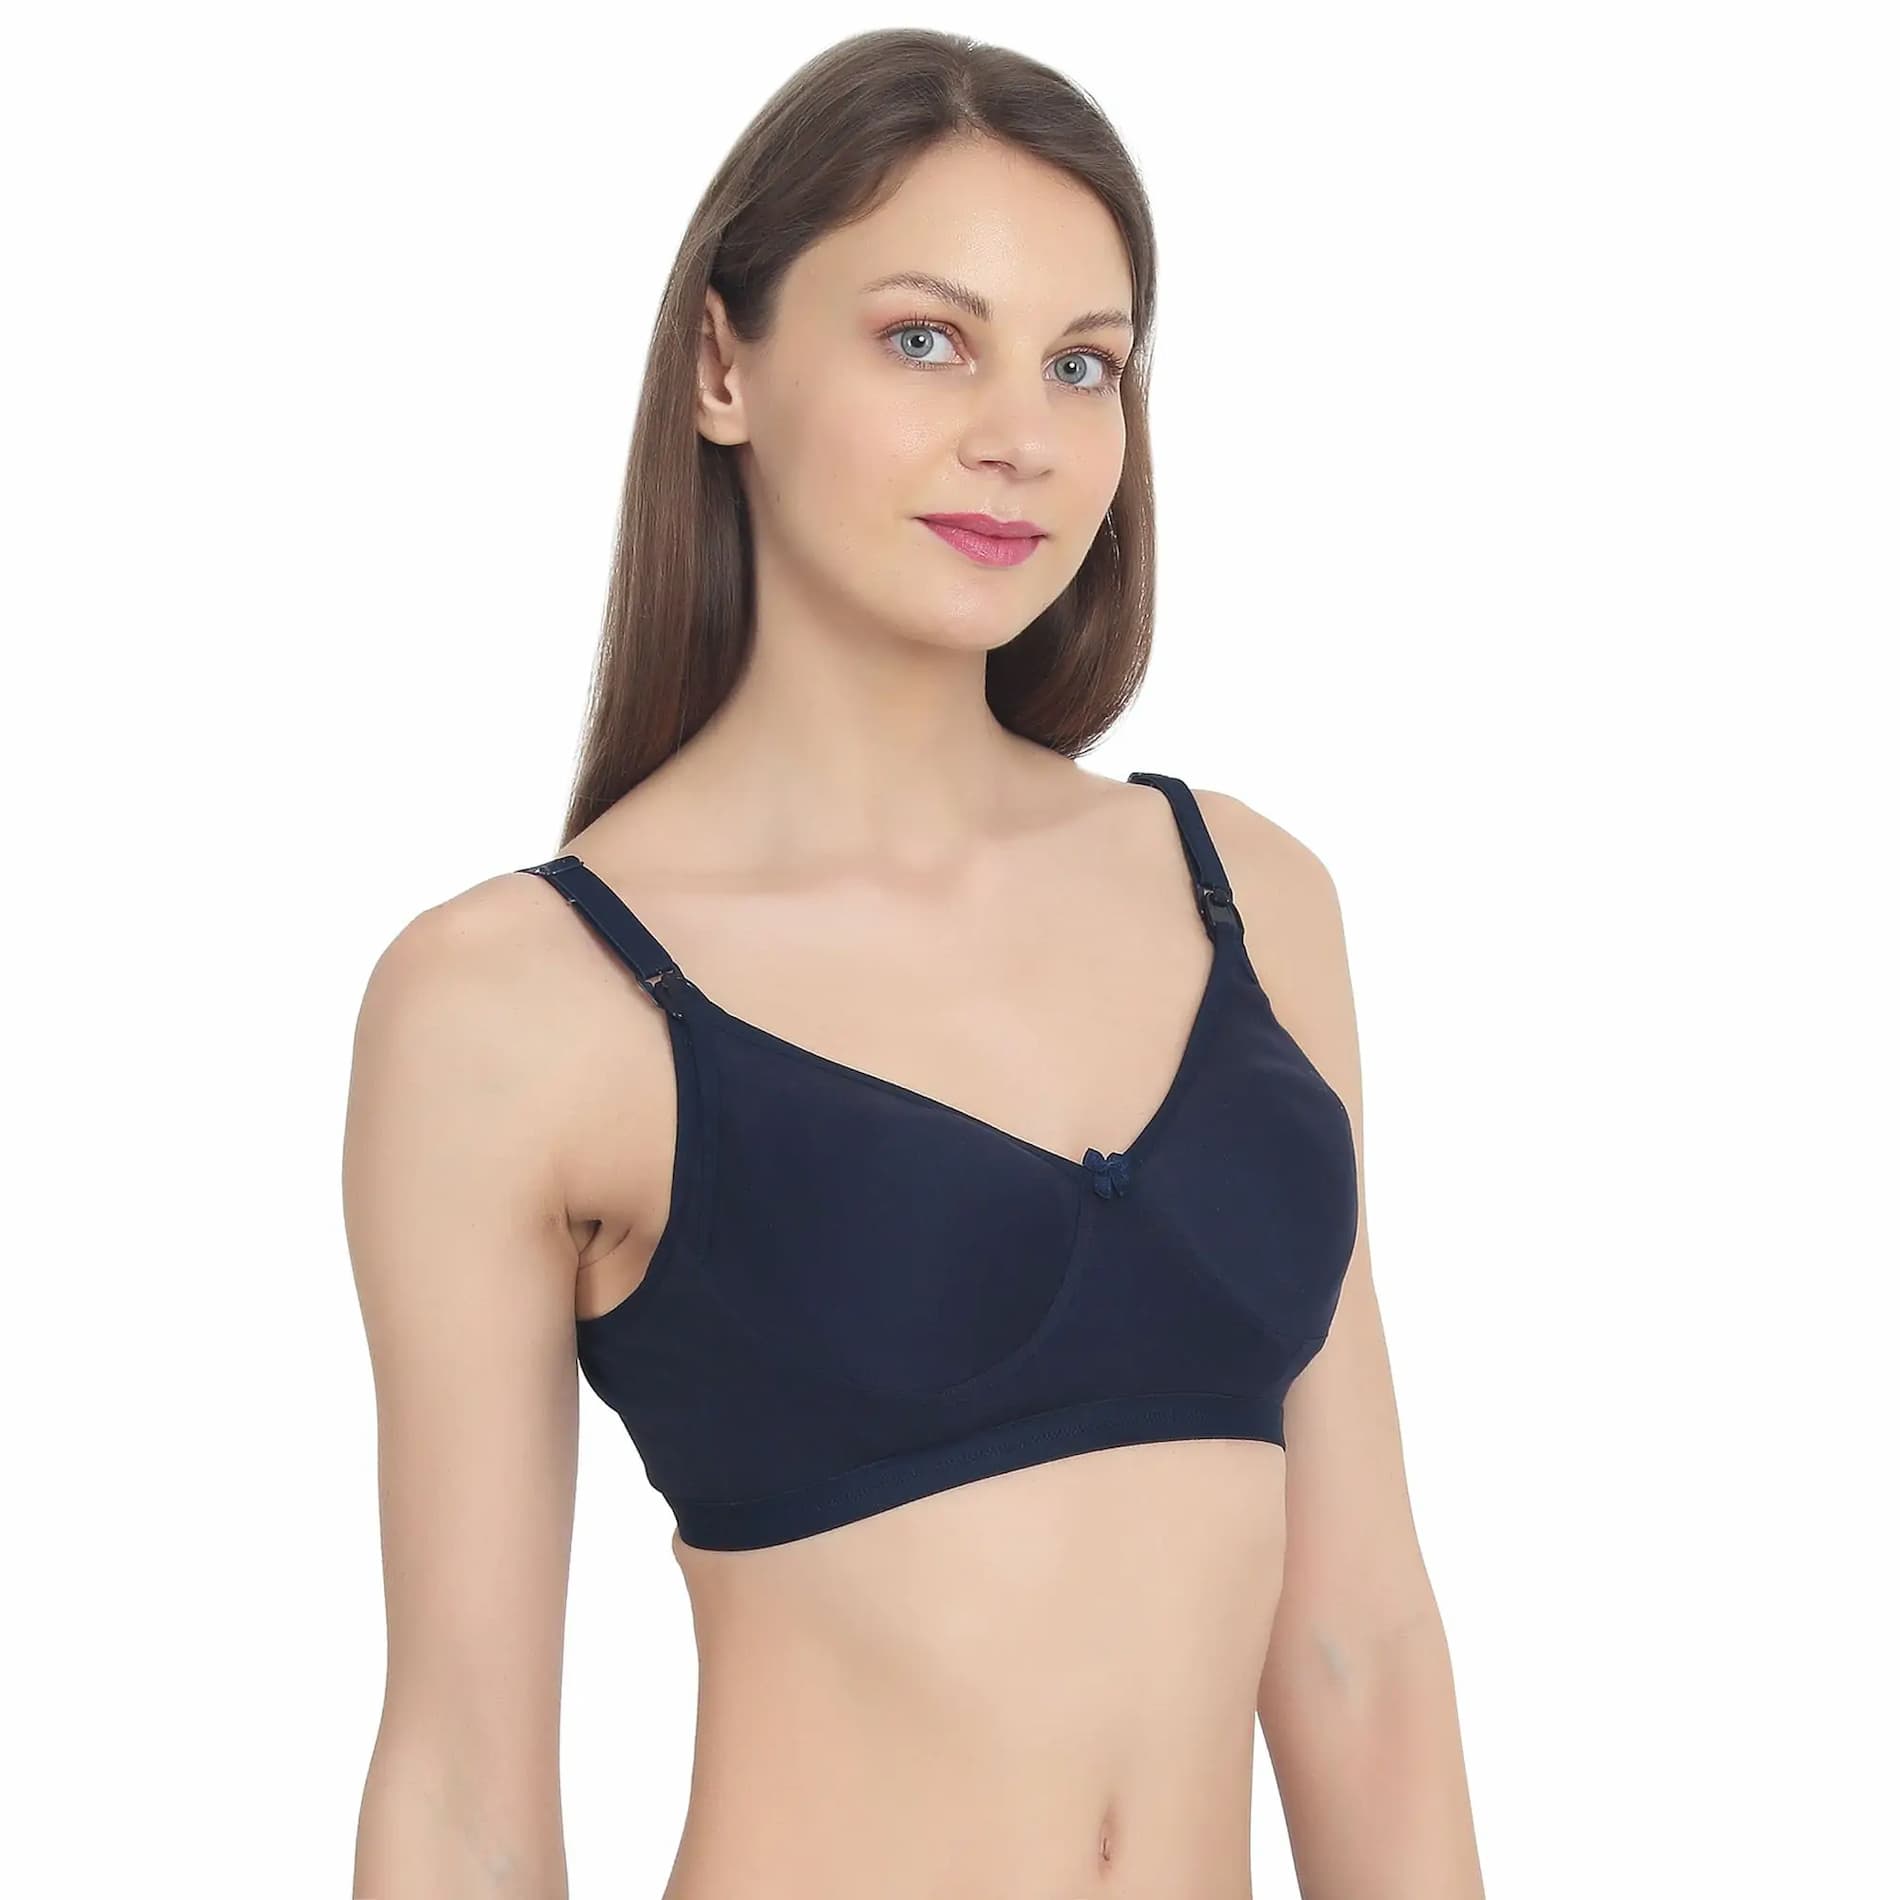 Mylo Maternity/Nursing Moulded Spacer Cup Bra Pack of 2 with free bra extender -(Navy, Skin) 32 B   